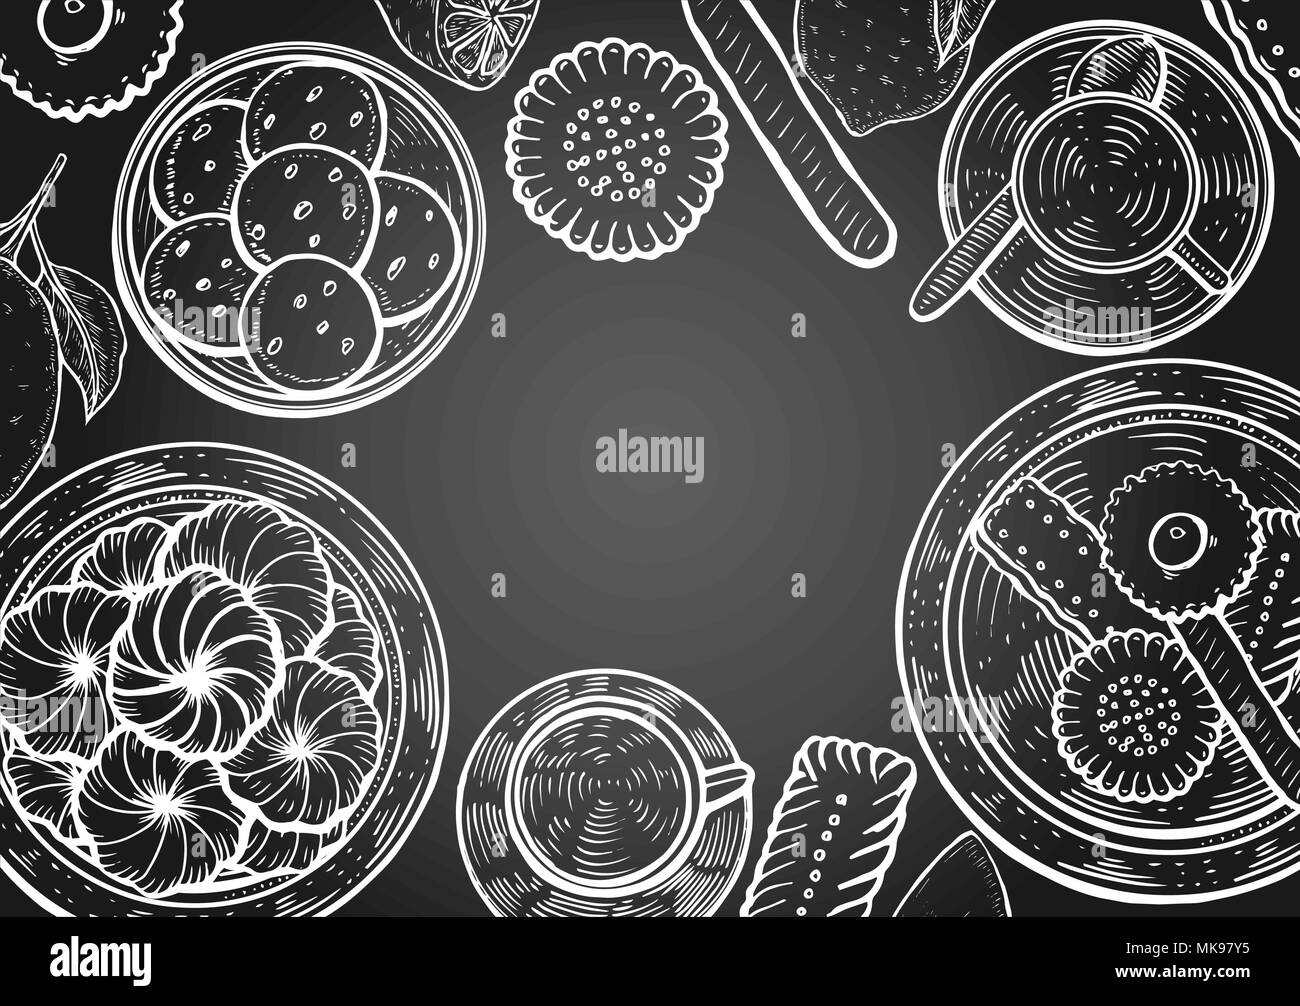 Hand drawn Food menu background. Middle eastern food. Oriental sweets vector illustration. Linear graphic. Monochrom vector illustration. Stock Vector